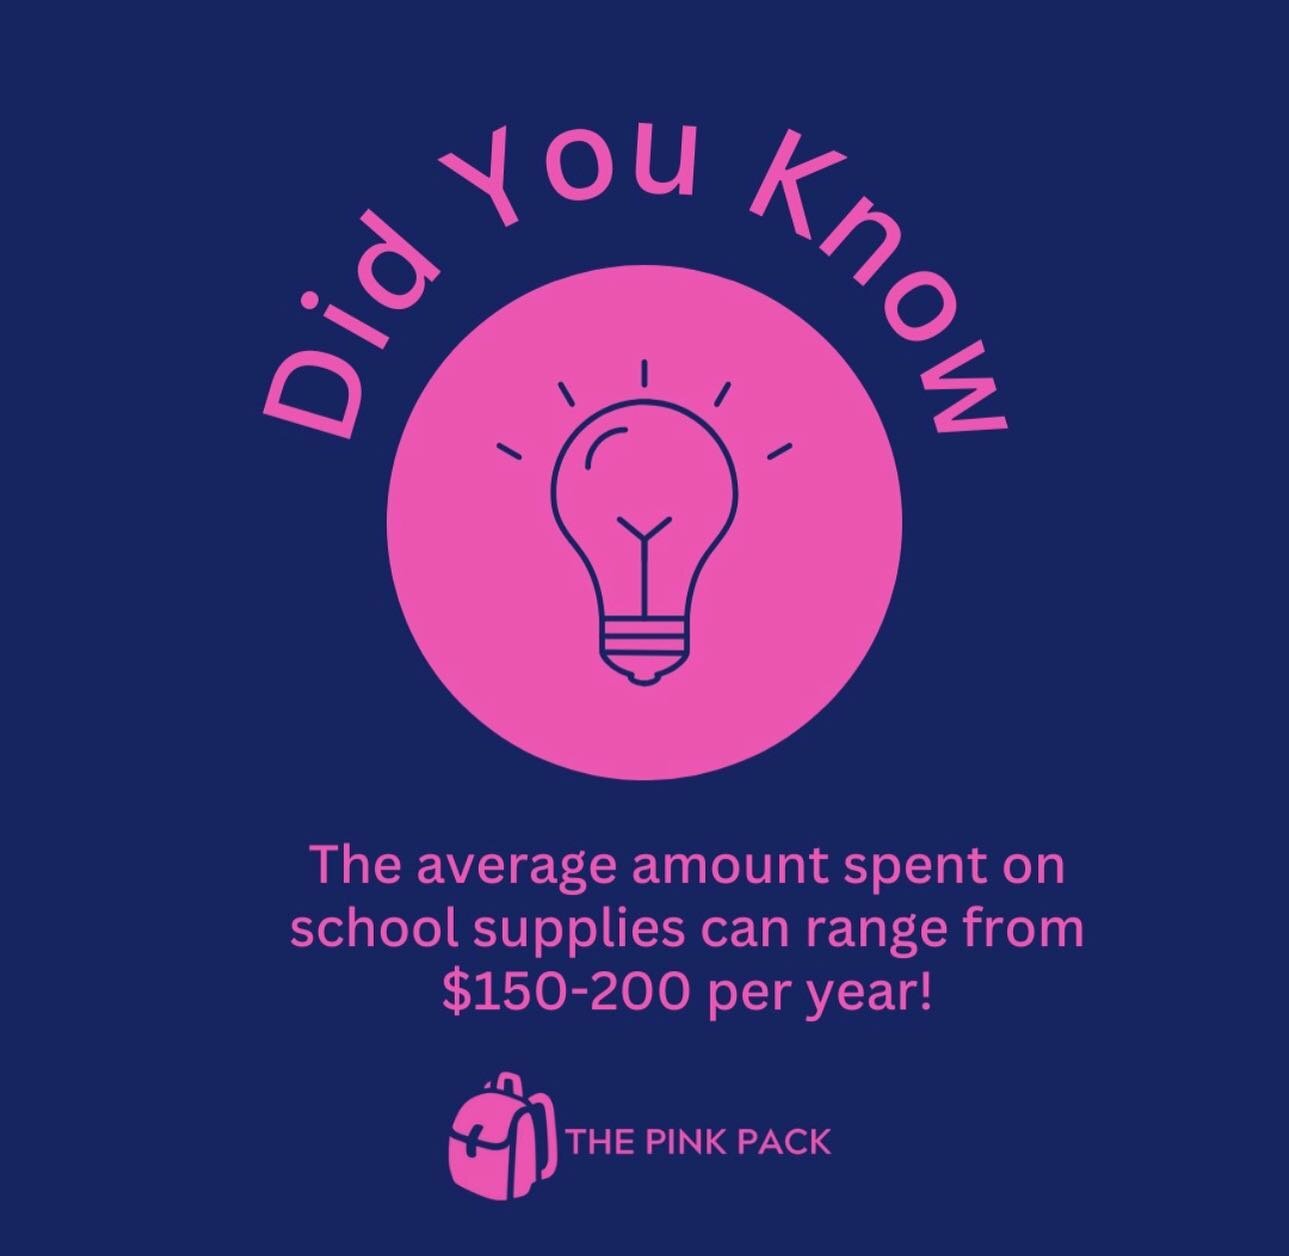 The Pink Pack strives to ease the financial burden on families that are dealing with a breast cancer diagnosis and who are struggling to balance the cost of treatments and doctor visits with the costs of everyday life. Please help us continue to prov